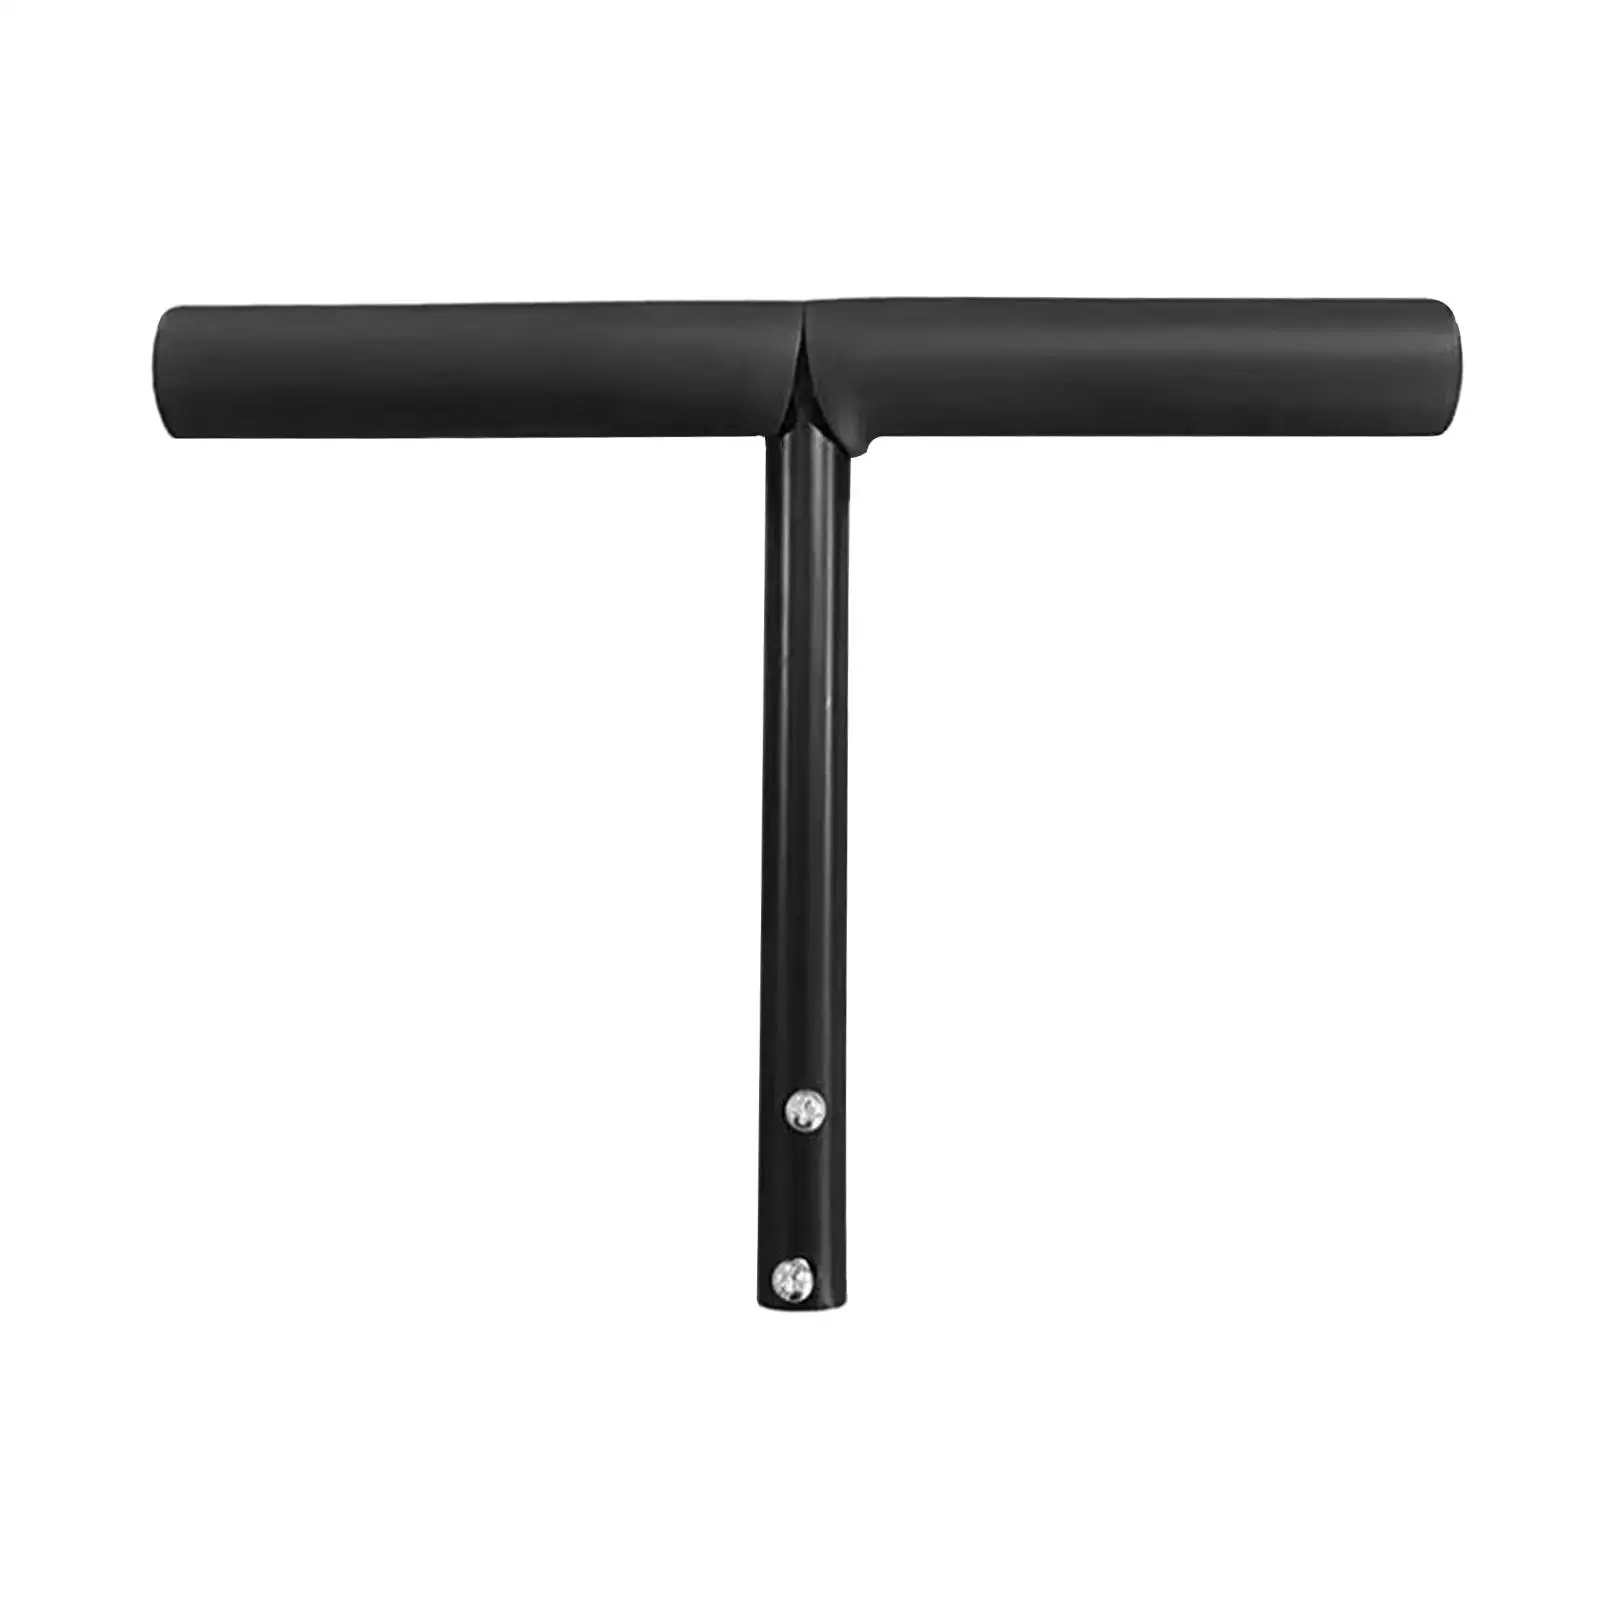 T Shaped Push Handle Bar, Kids Tricycle Accessories, Practical